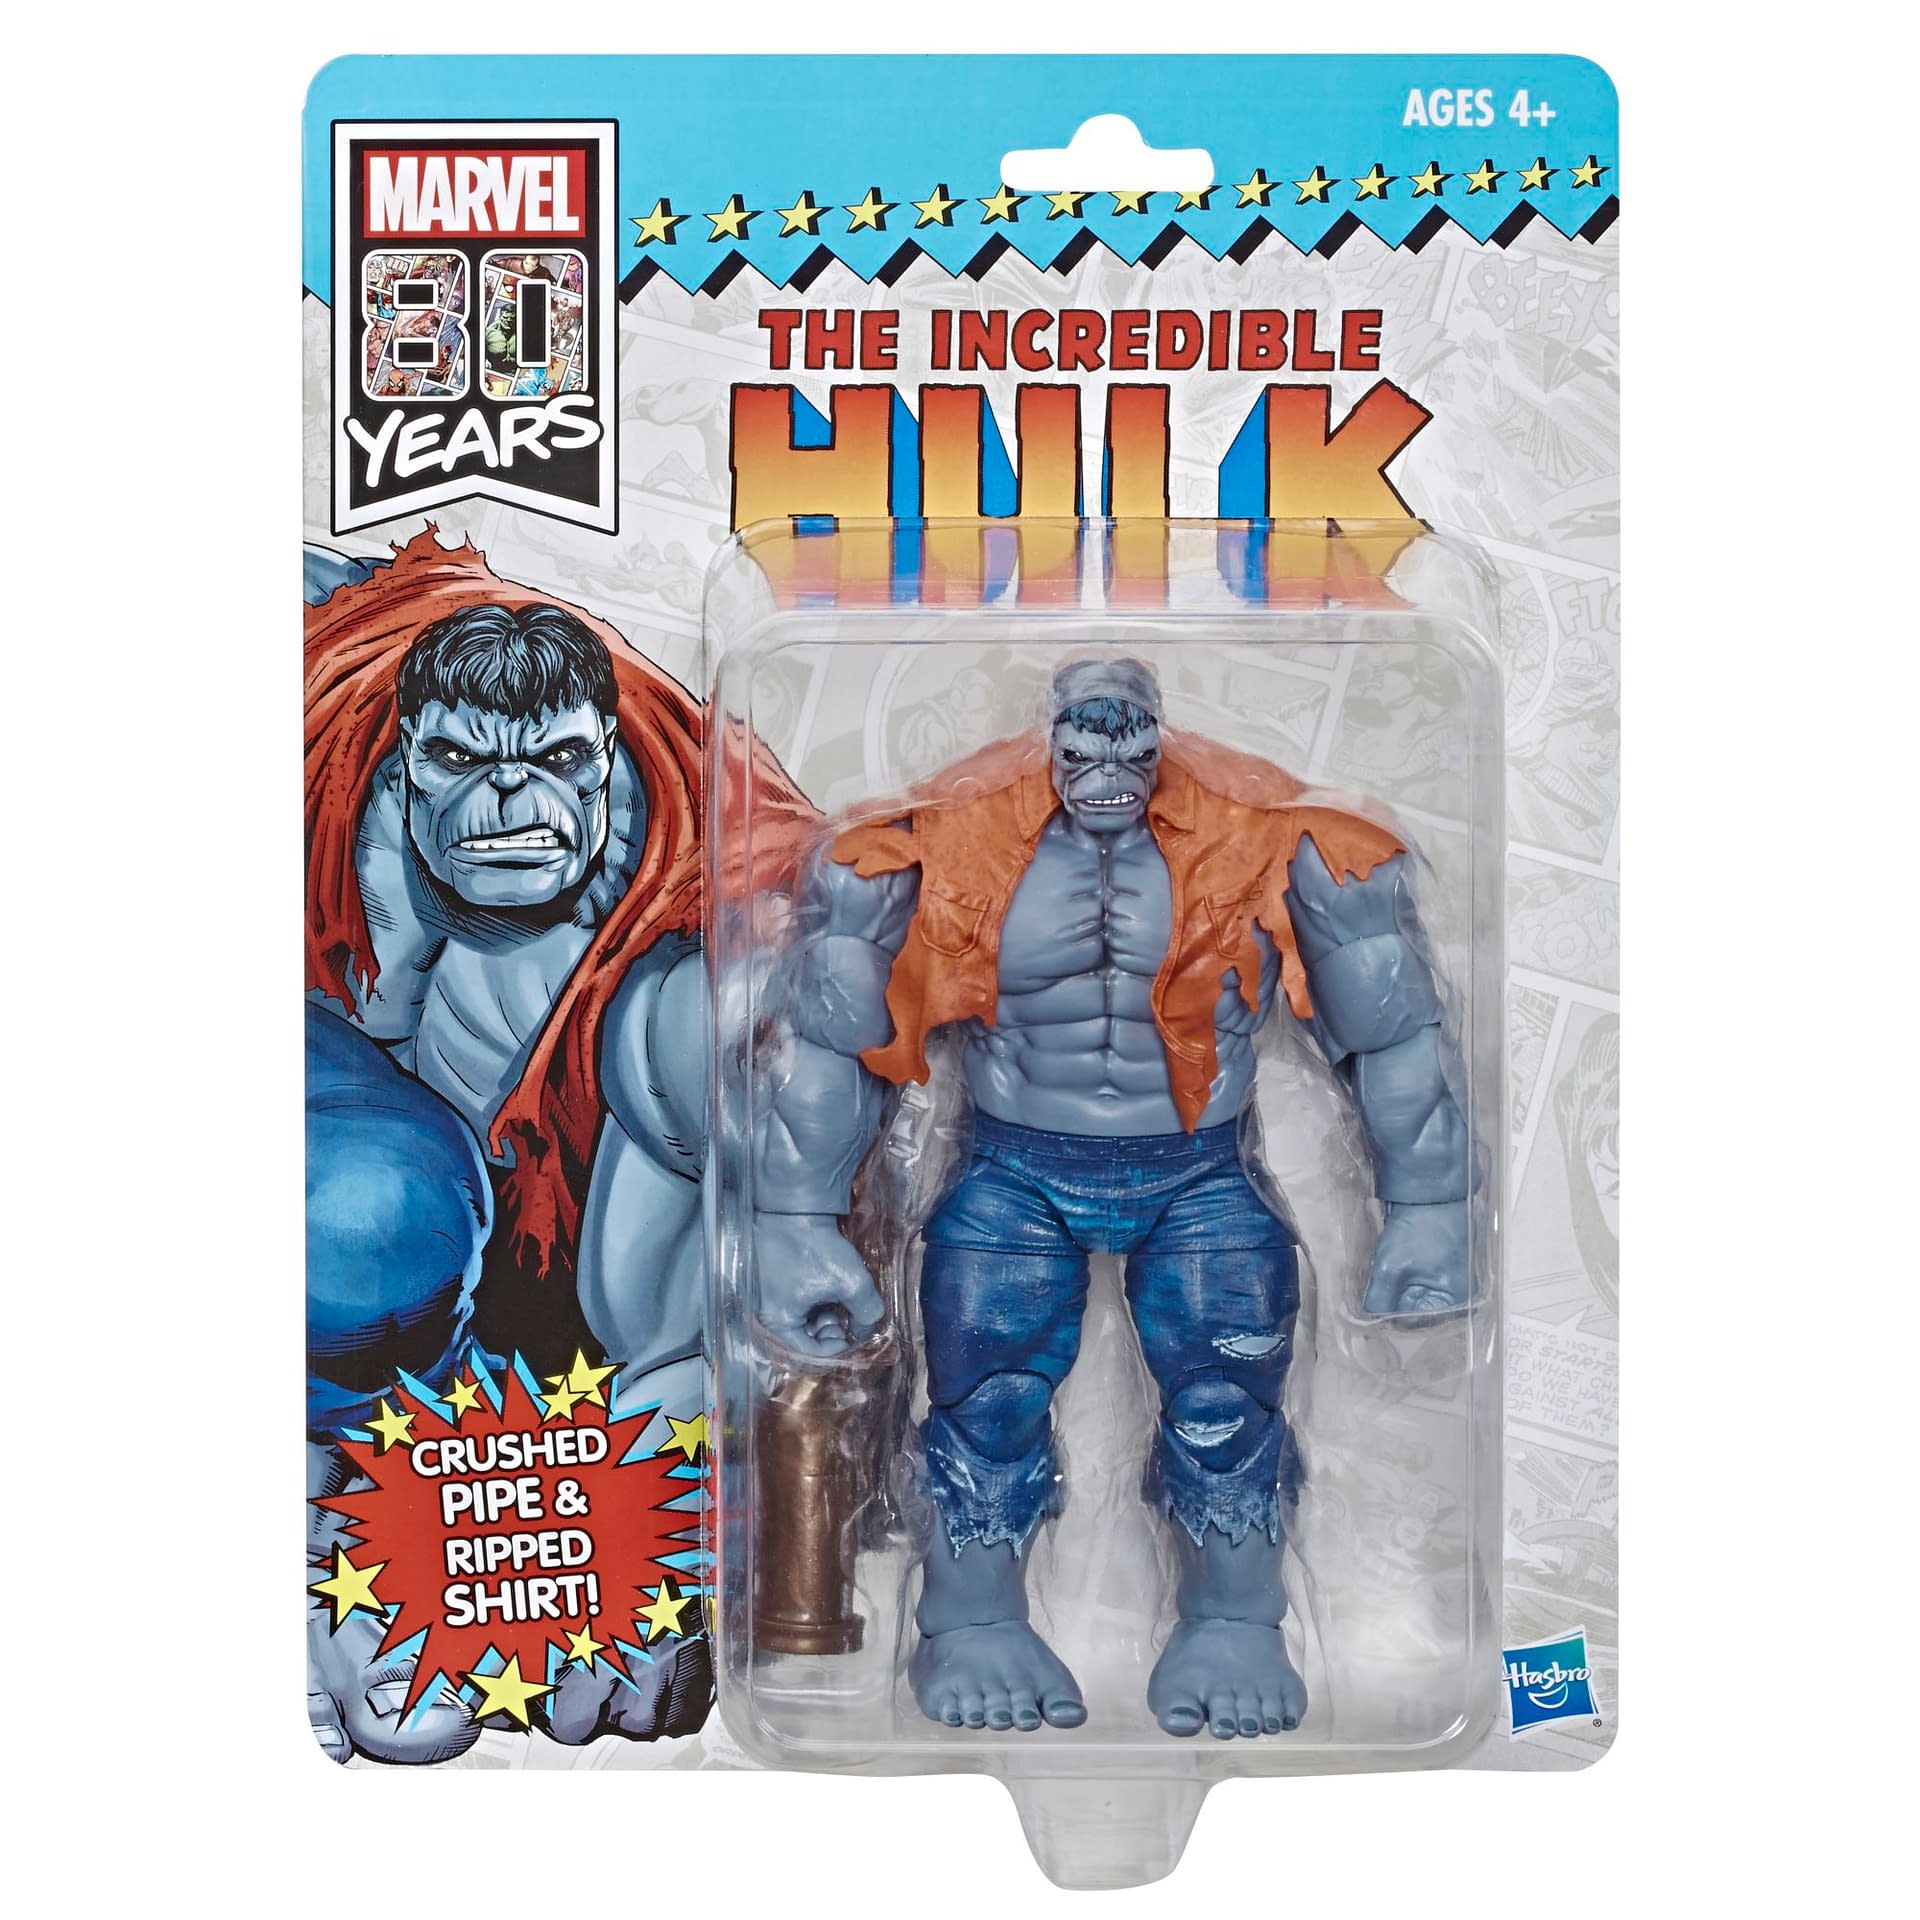 The Incredible Hulk Gets a European Convention Exclusive Figure